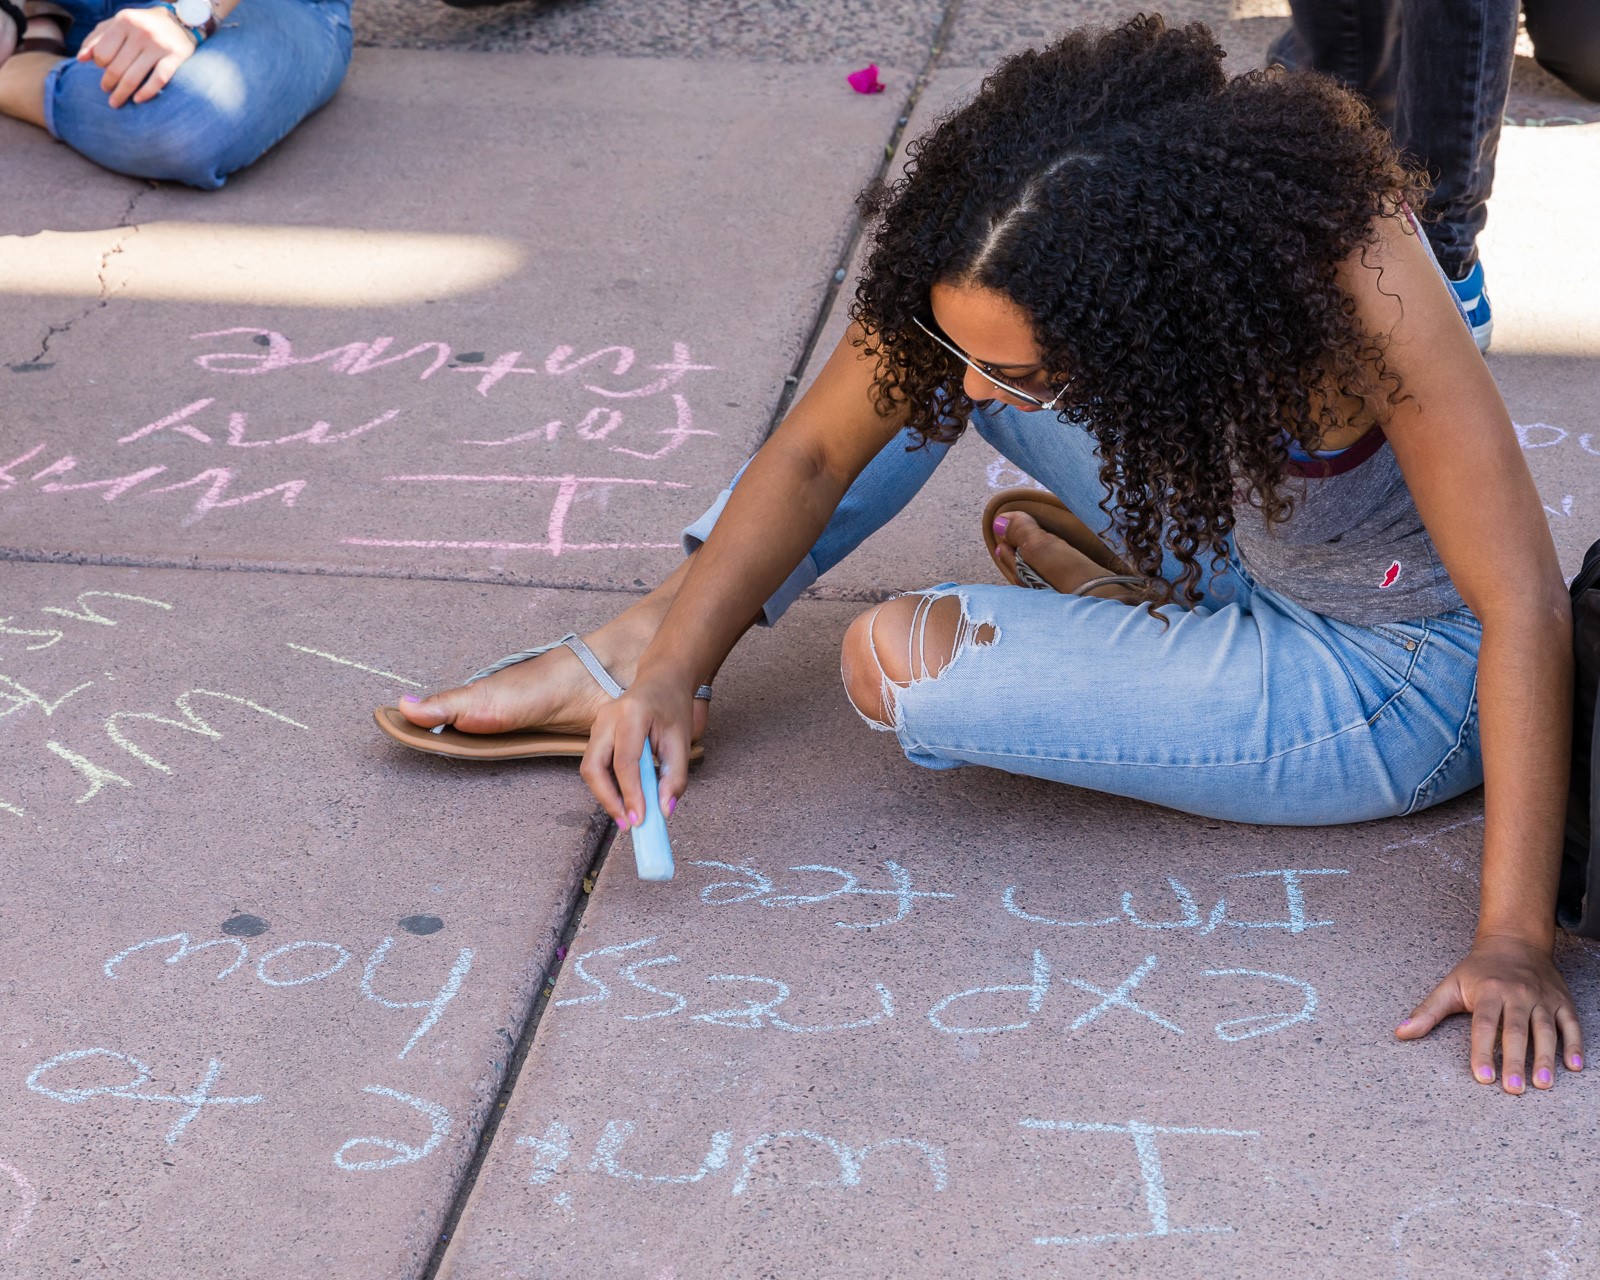 A person writes with sidewalk chalk at the 2019 celebration of National Day on Writing at ASU / Photo by Bruce Matsunaga